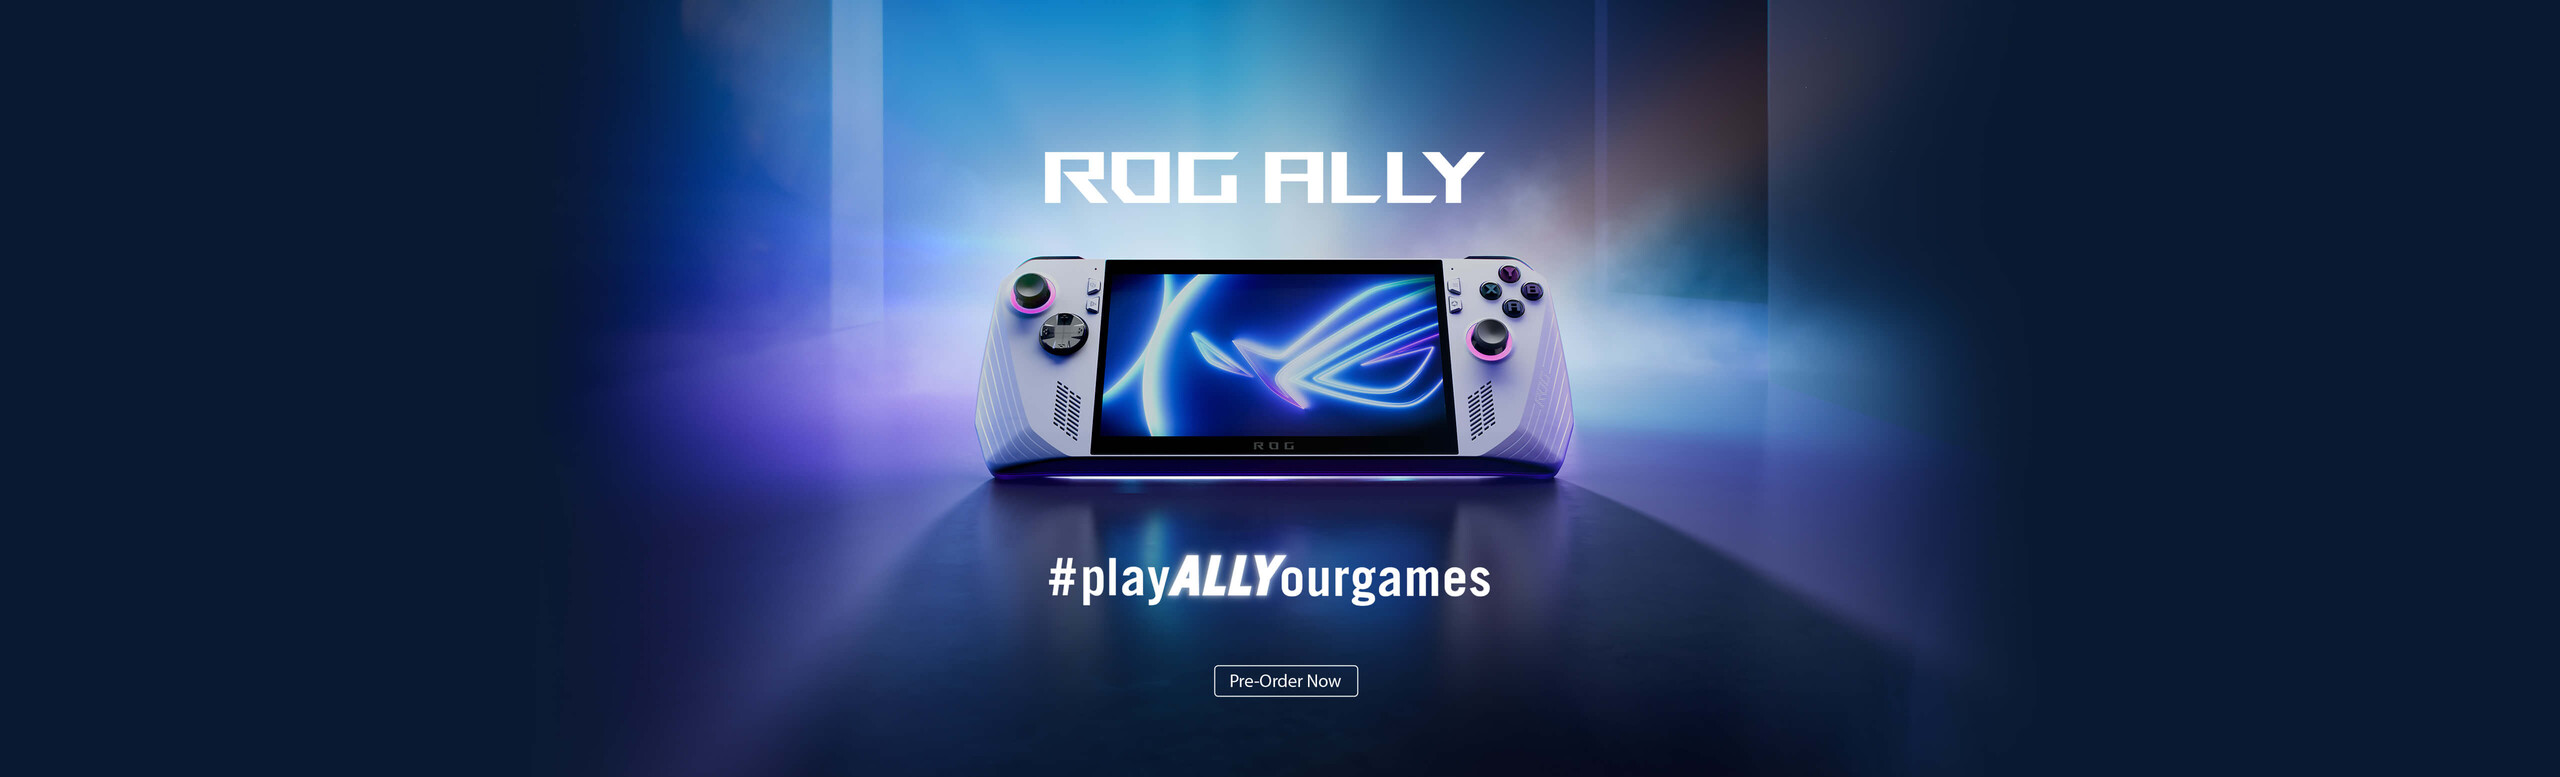 ROG ALLY #playALLYourgames